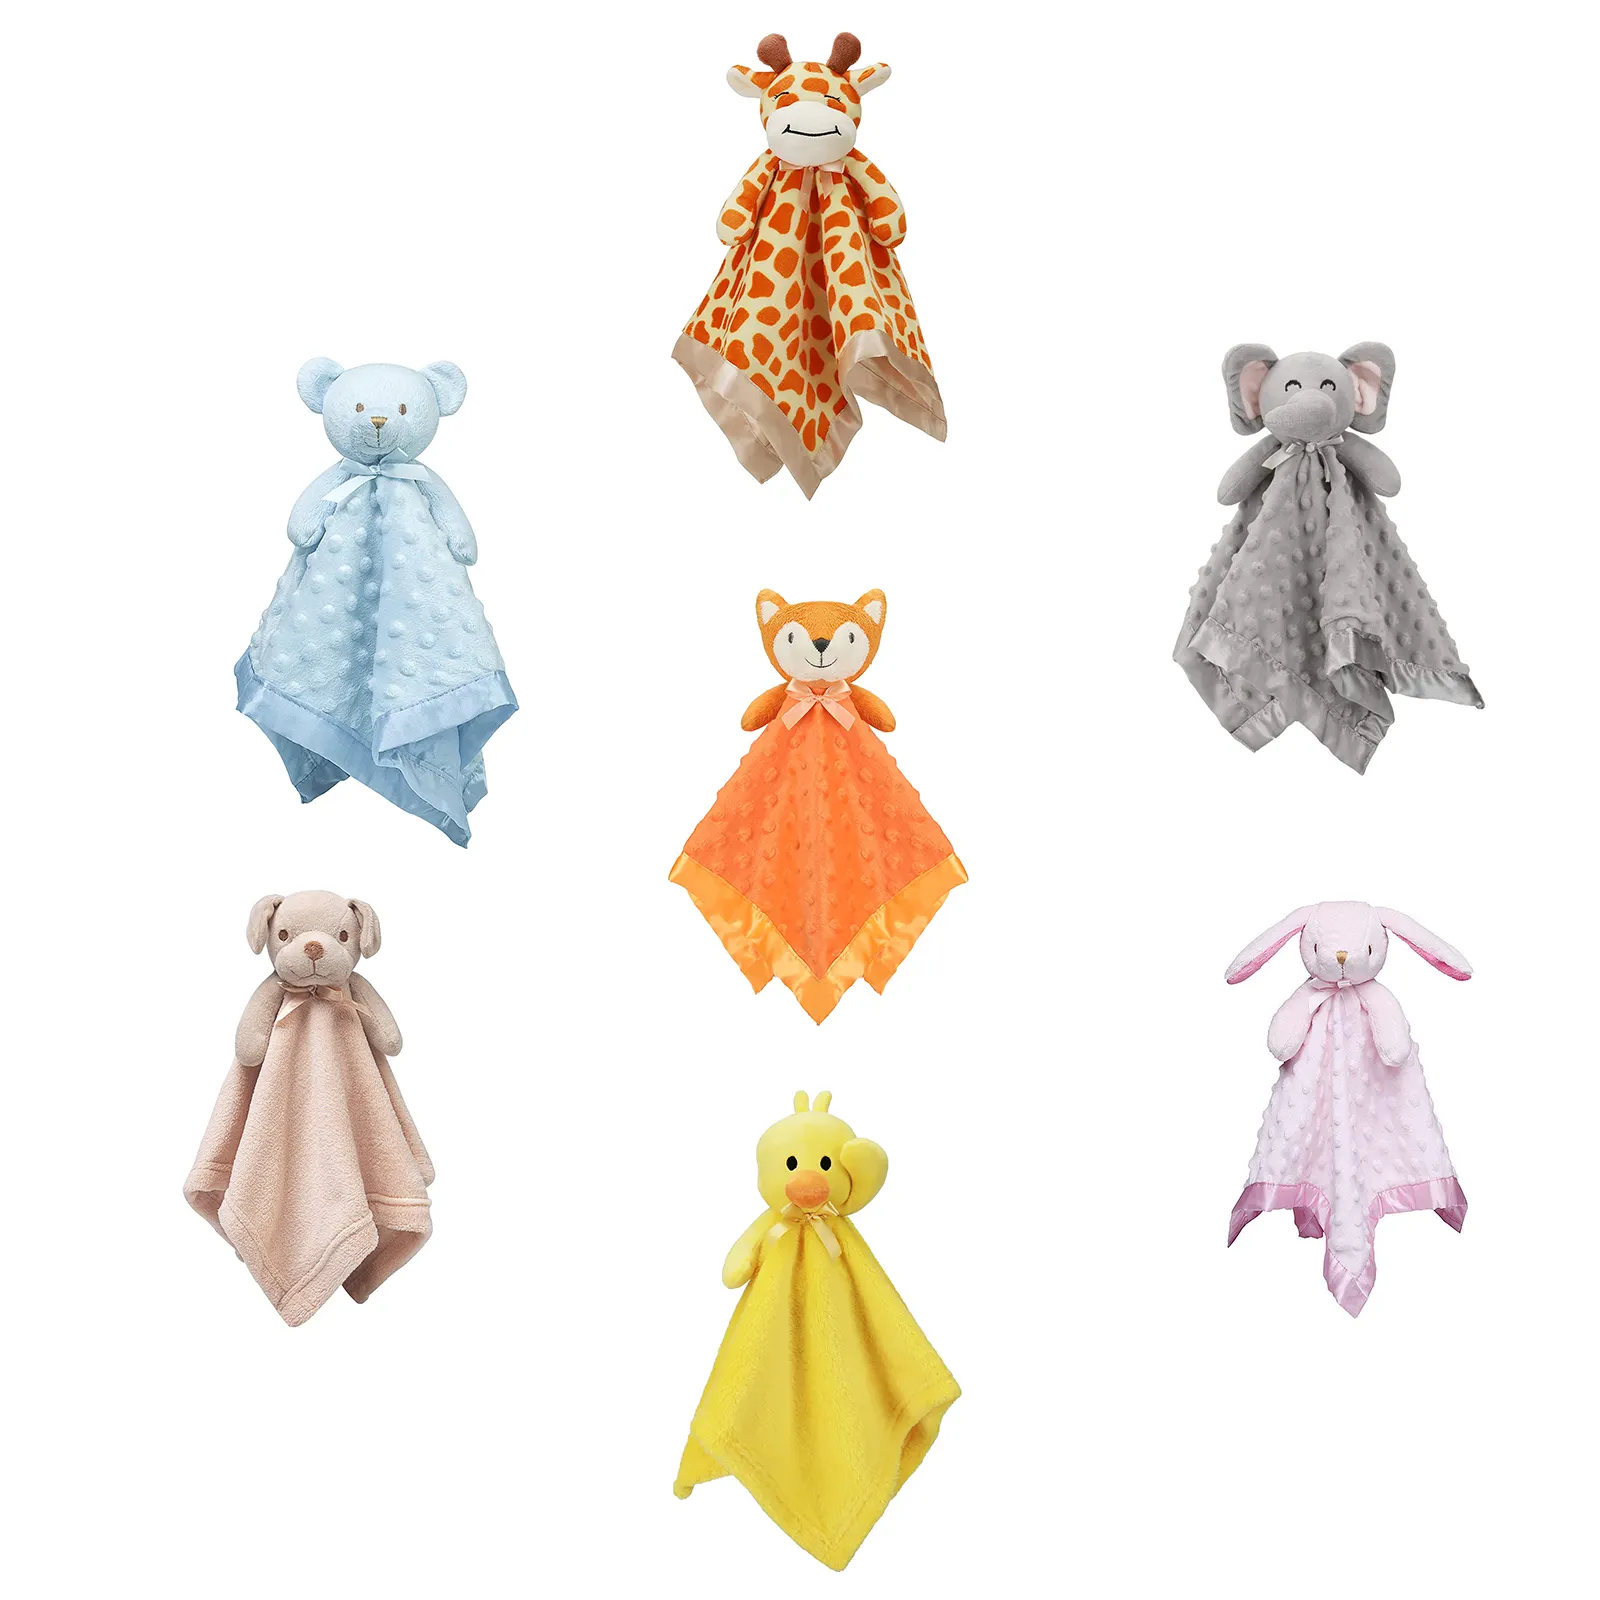 OEM Whosale Teddy Rabit Elephant Fox Duck Toy Baby Blanket With Plush Toy Gift For Newborn Boys And Girls